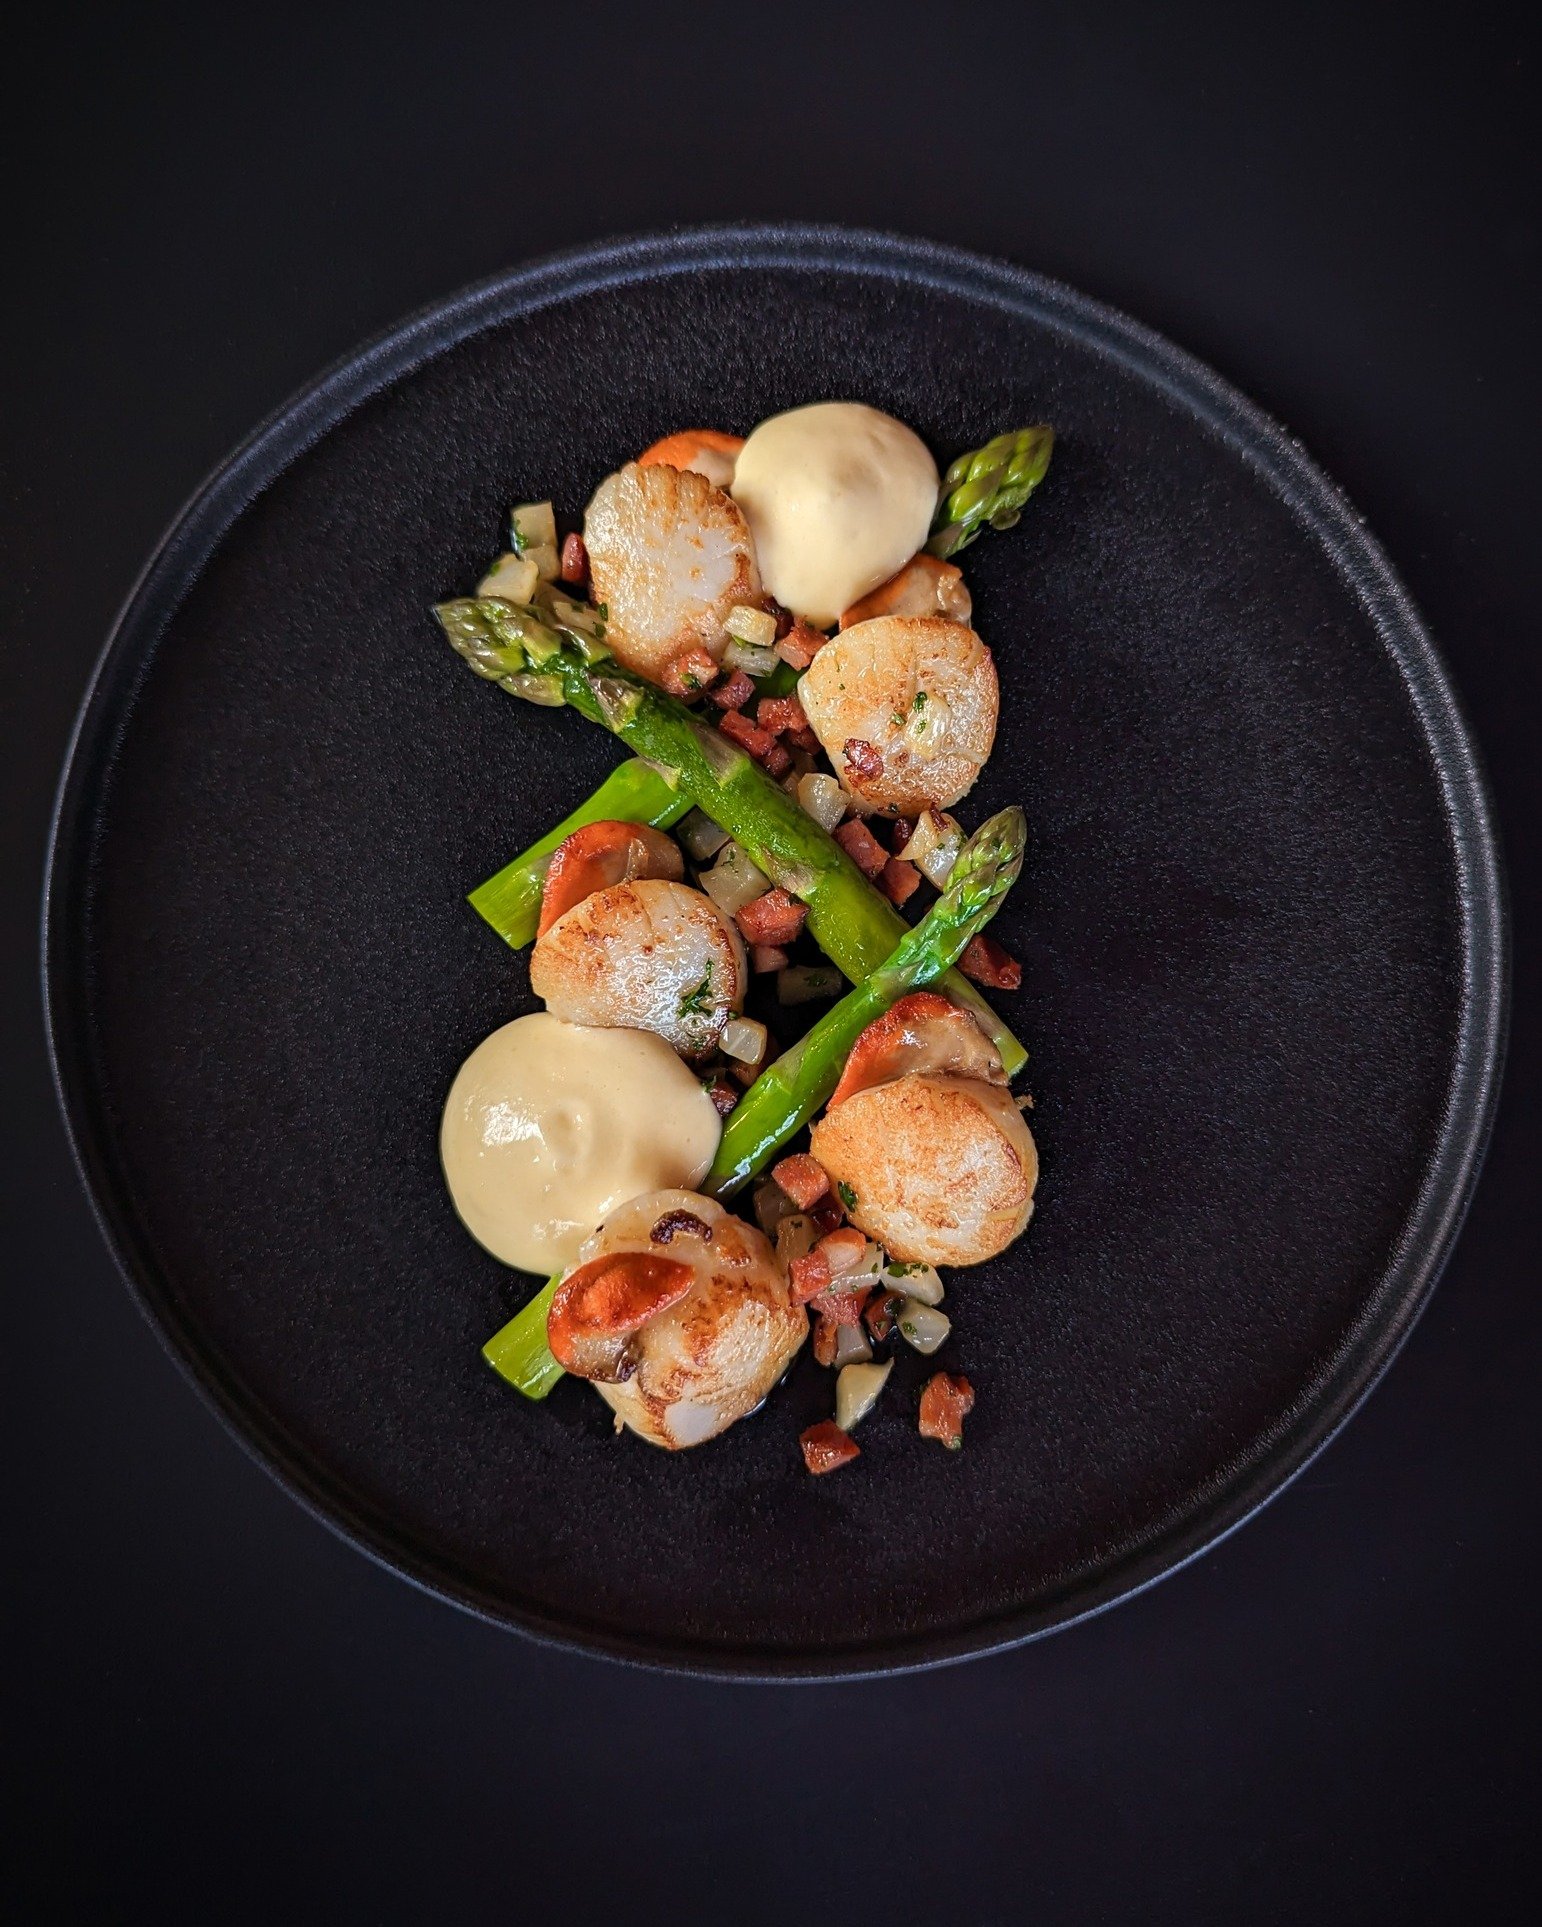 Pre-season survey scallops have just arrived at #MuresUpperDeck!  These local scallops are sweet, plump, incredibly delicious, and they are available from the specials menu until sold out!
.
📸: Tasmania Scallops
With chorizo, fennel, asparagus and h